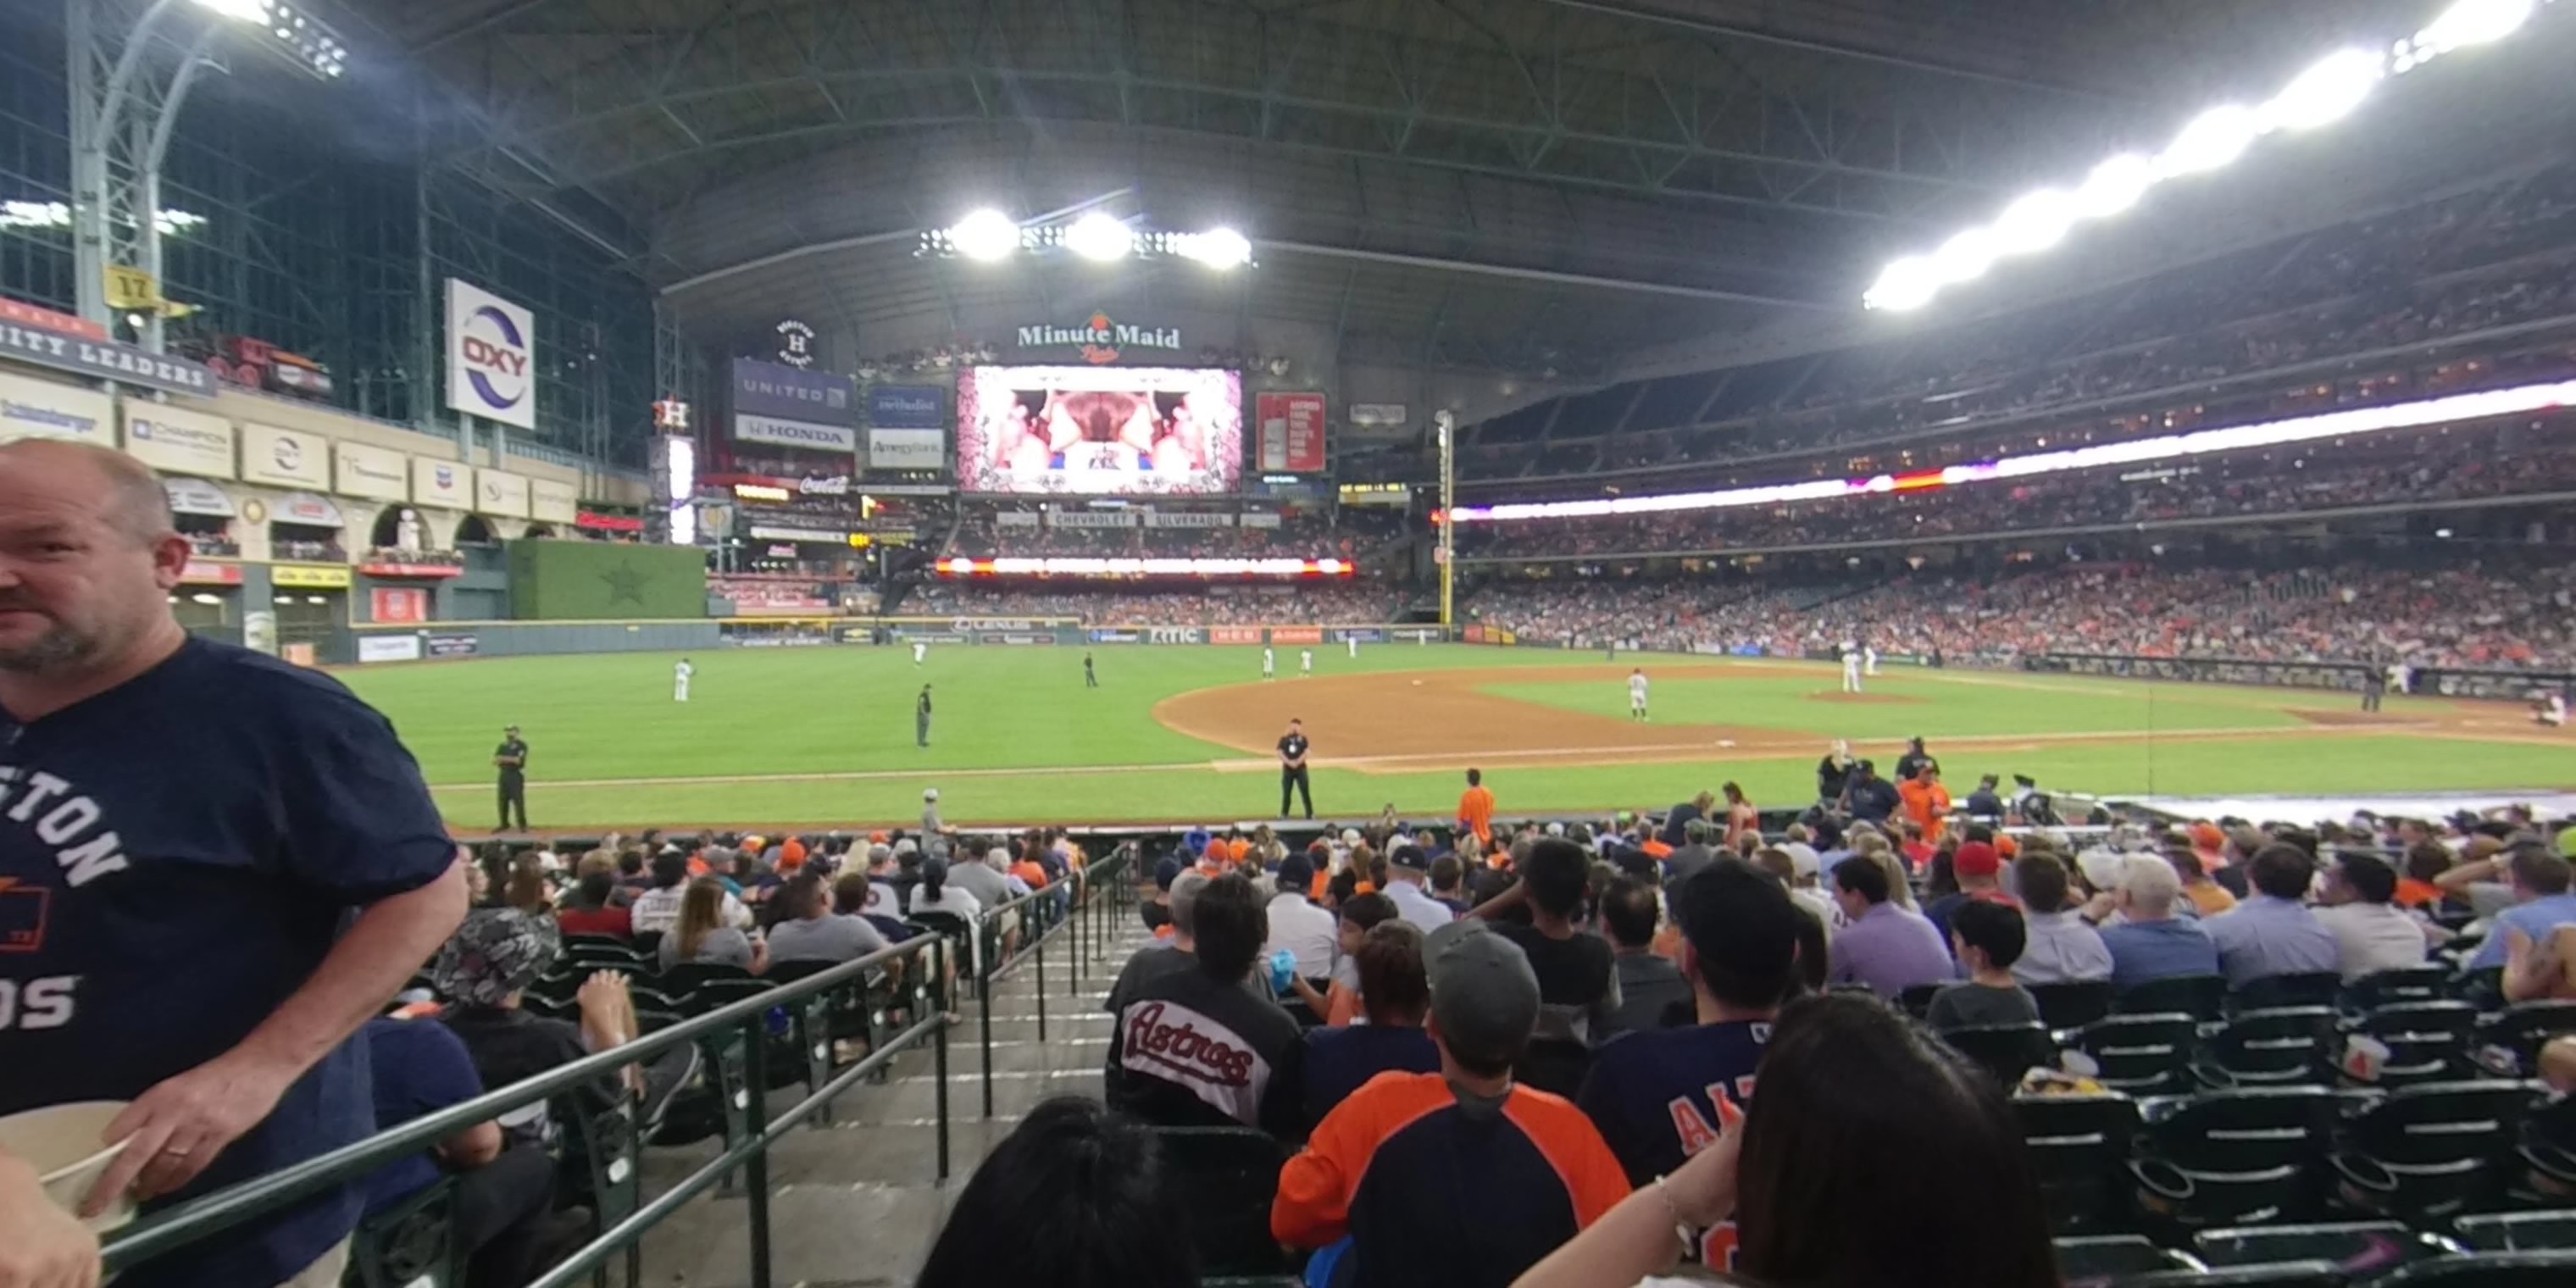 4/29/11 at Minute Maid Park